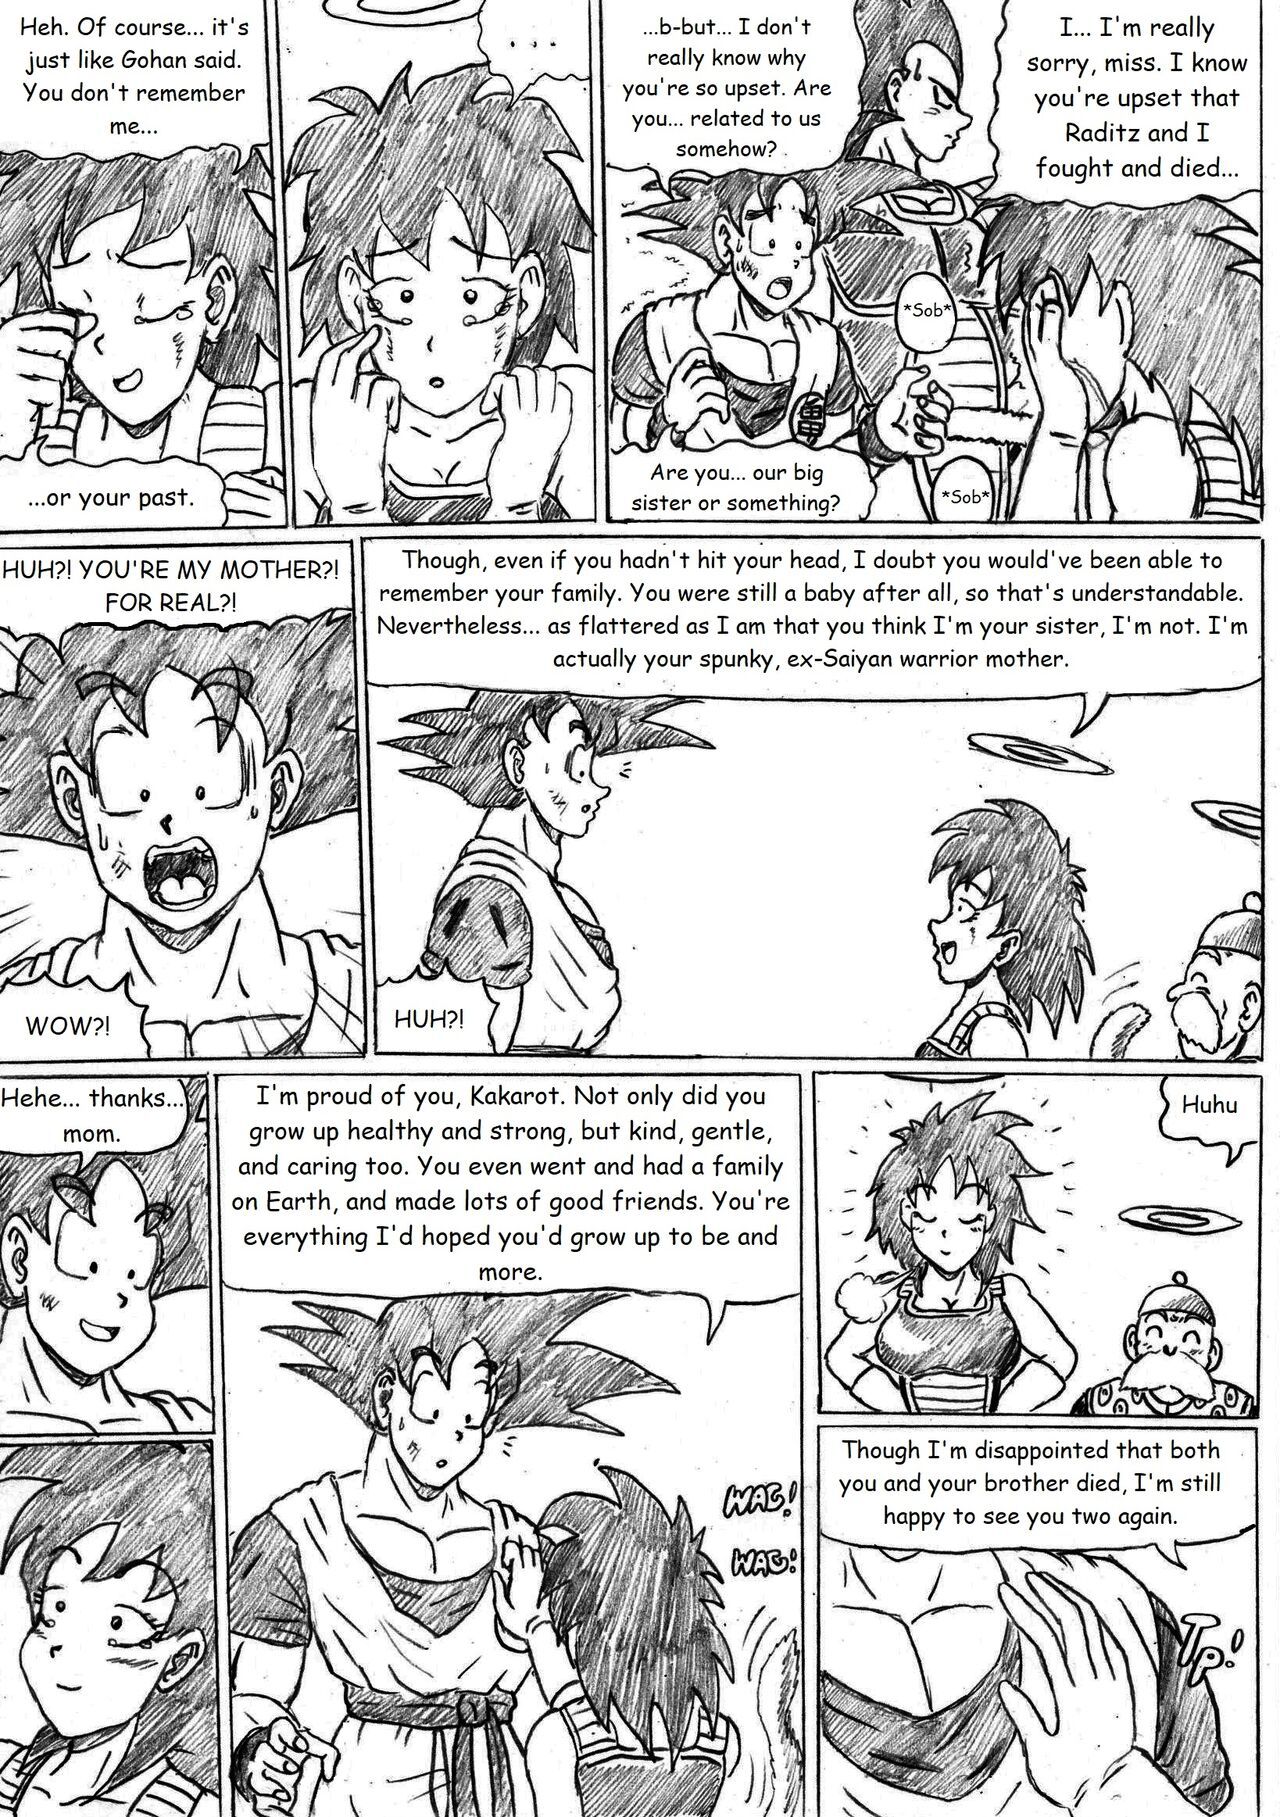 [TheWriteFiction] Dragonball Z Golden Age - Chapter 5 - Teamwork (Ongoing) 6